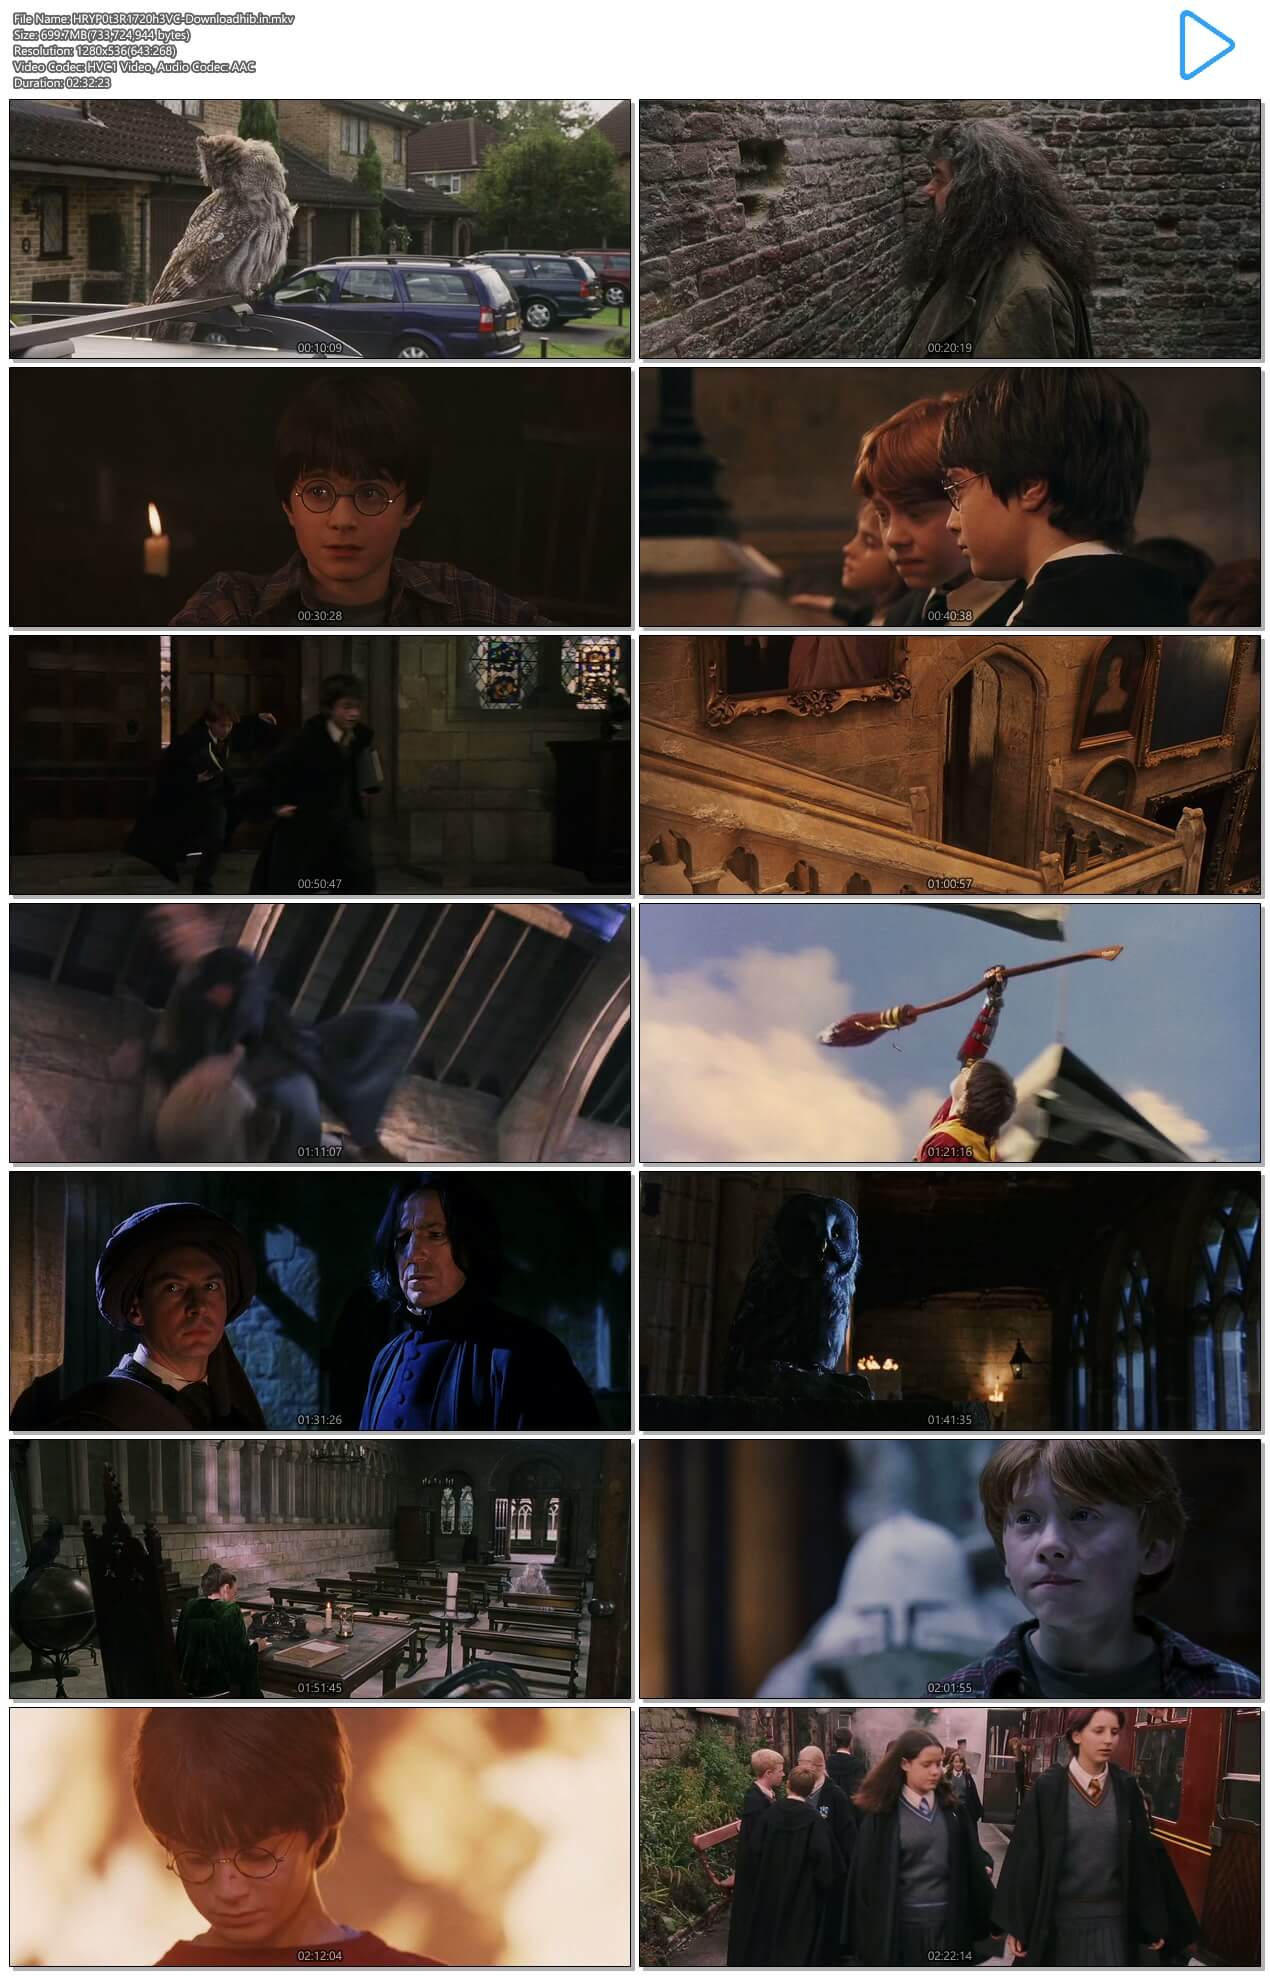 harry potter movies down load in dual audio 720p mp4 torrent